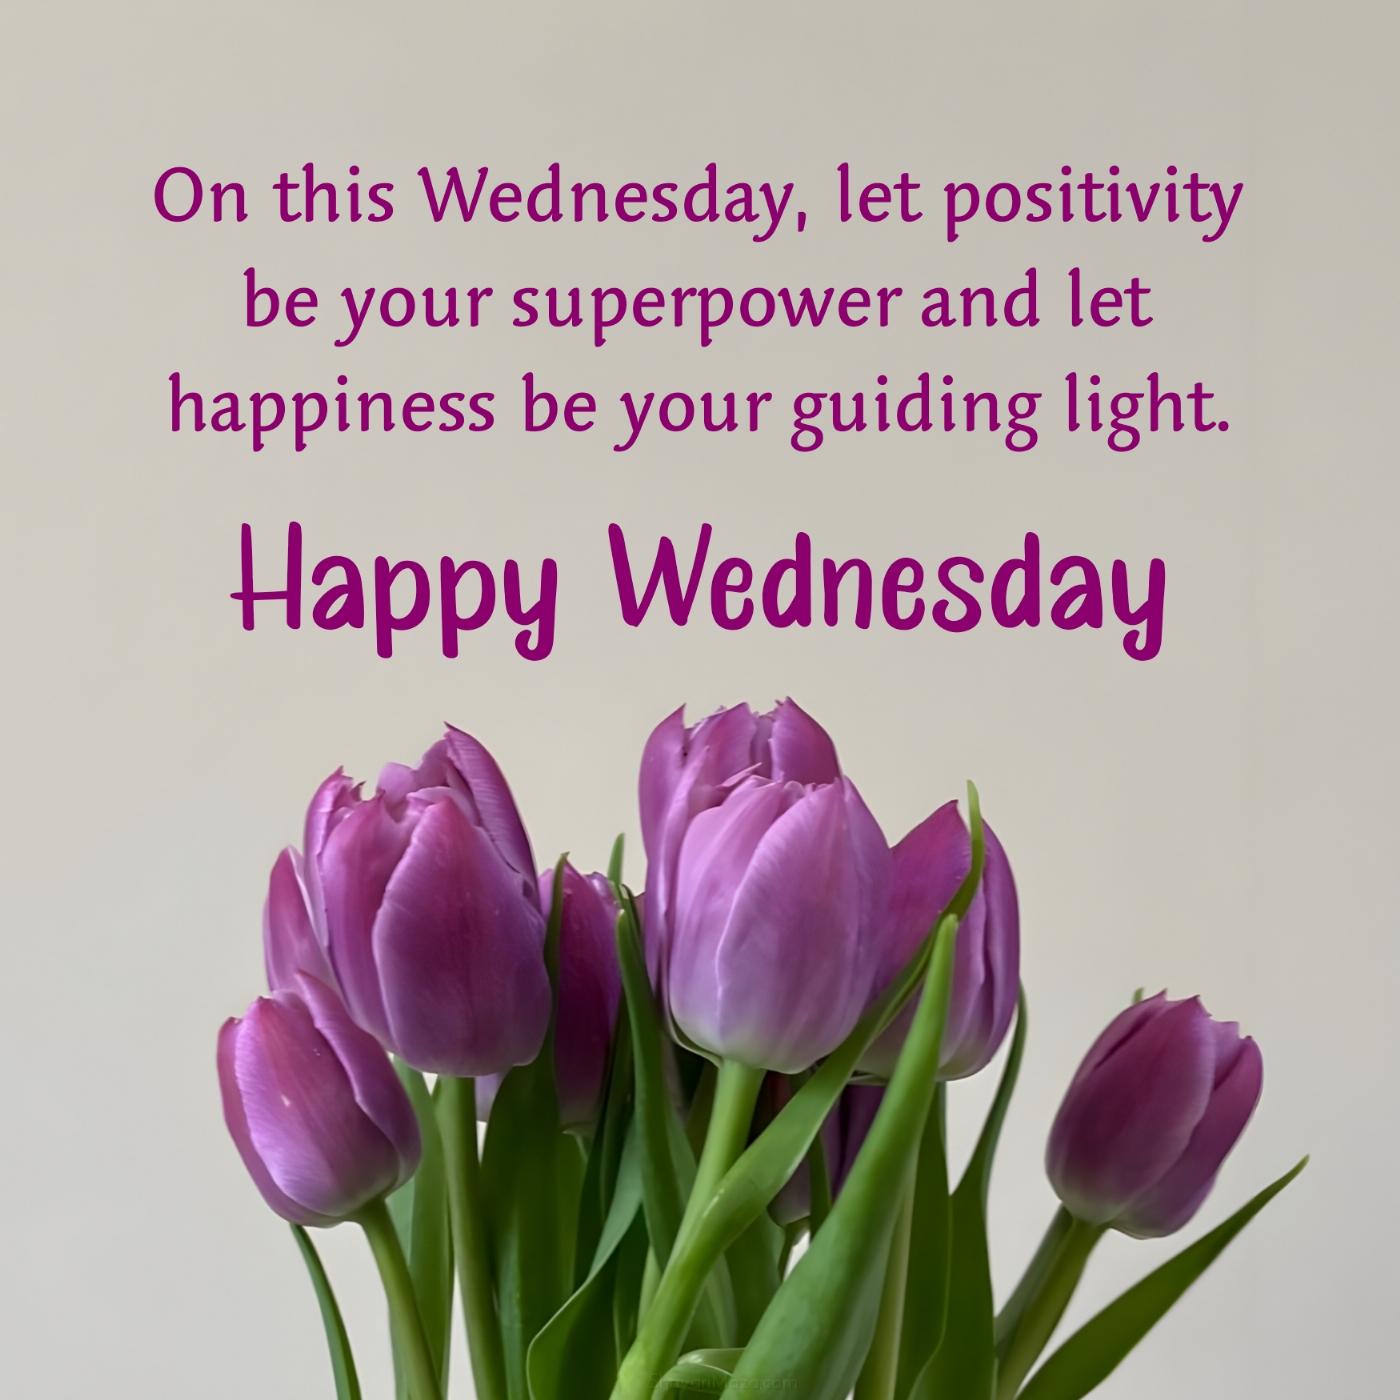 On this Wednesday let positivity be your superpower